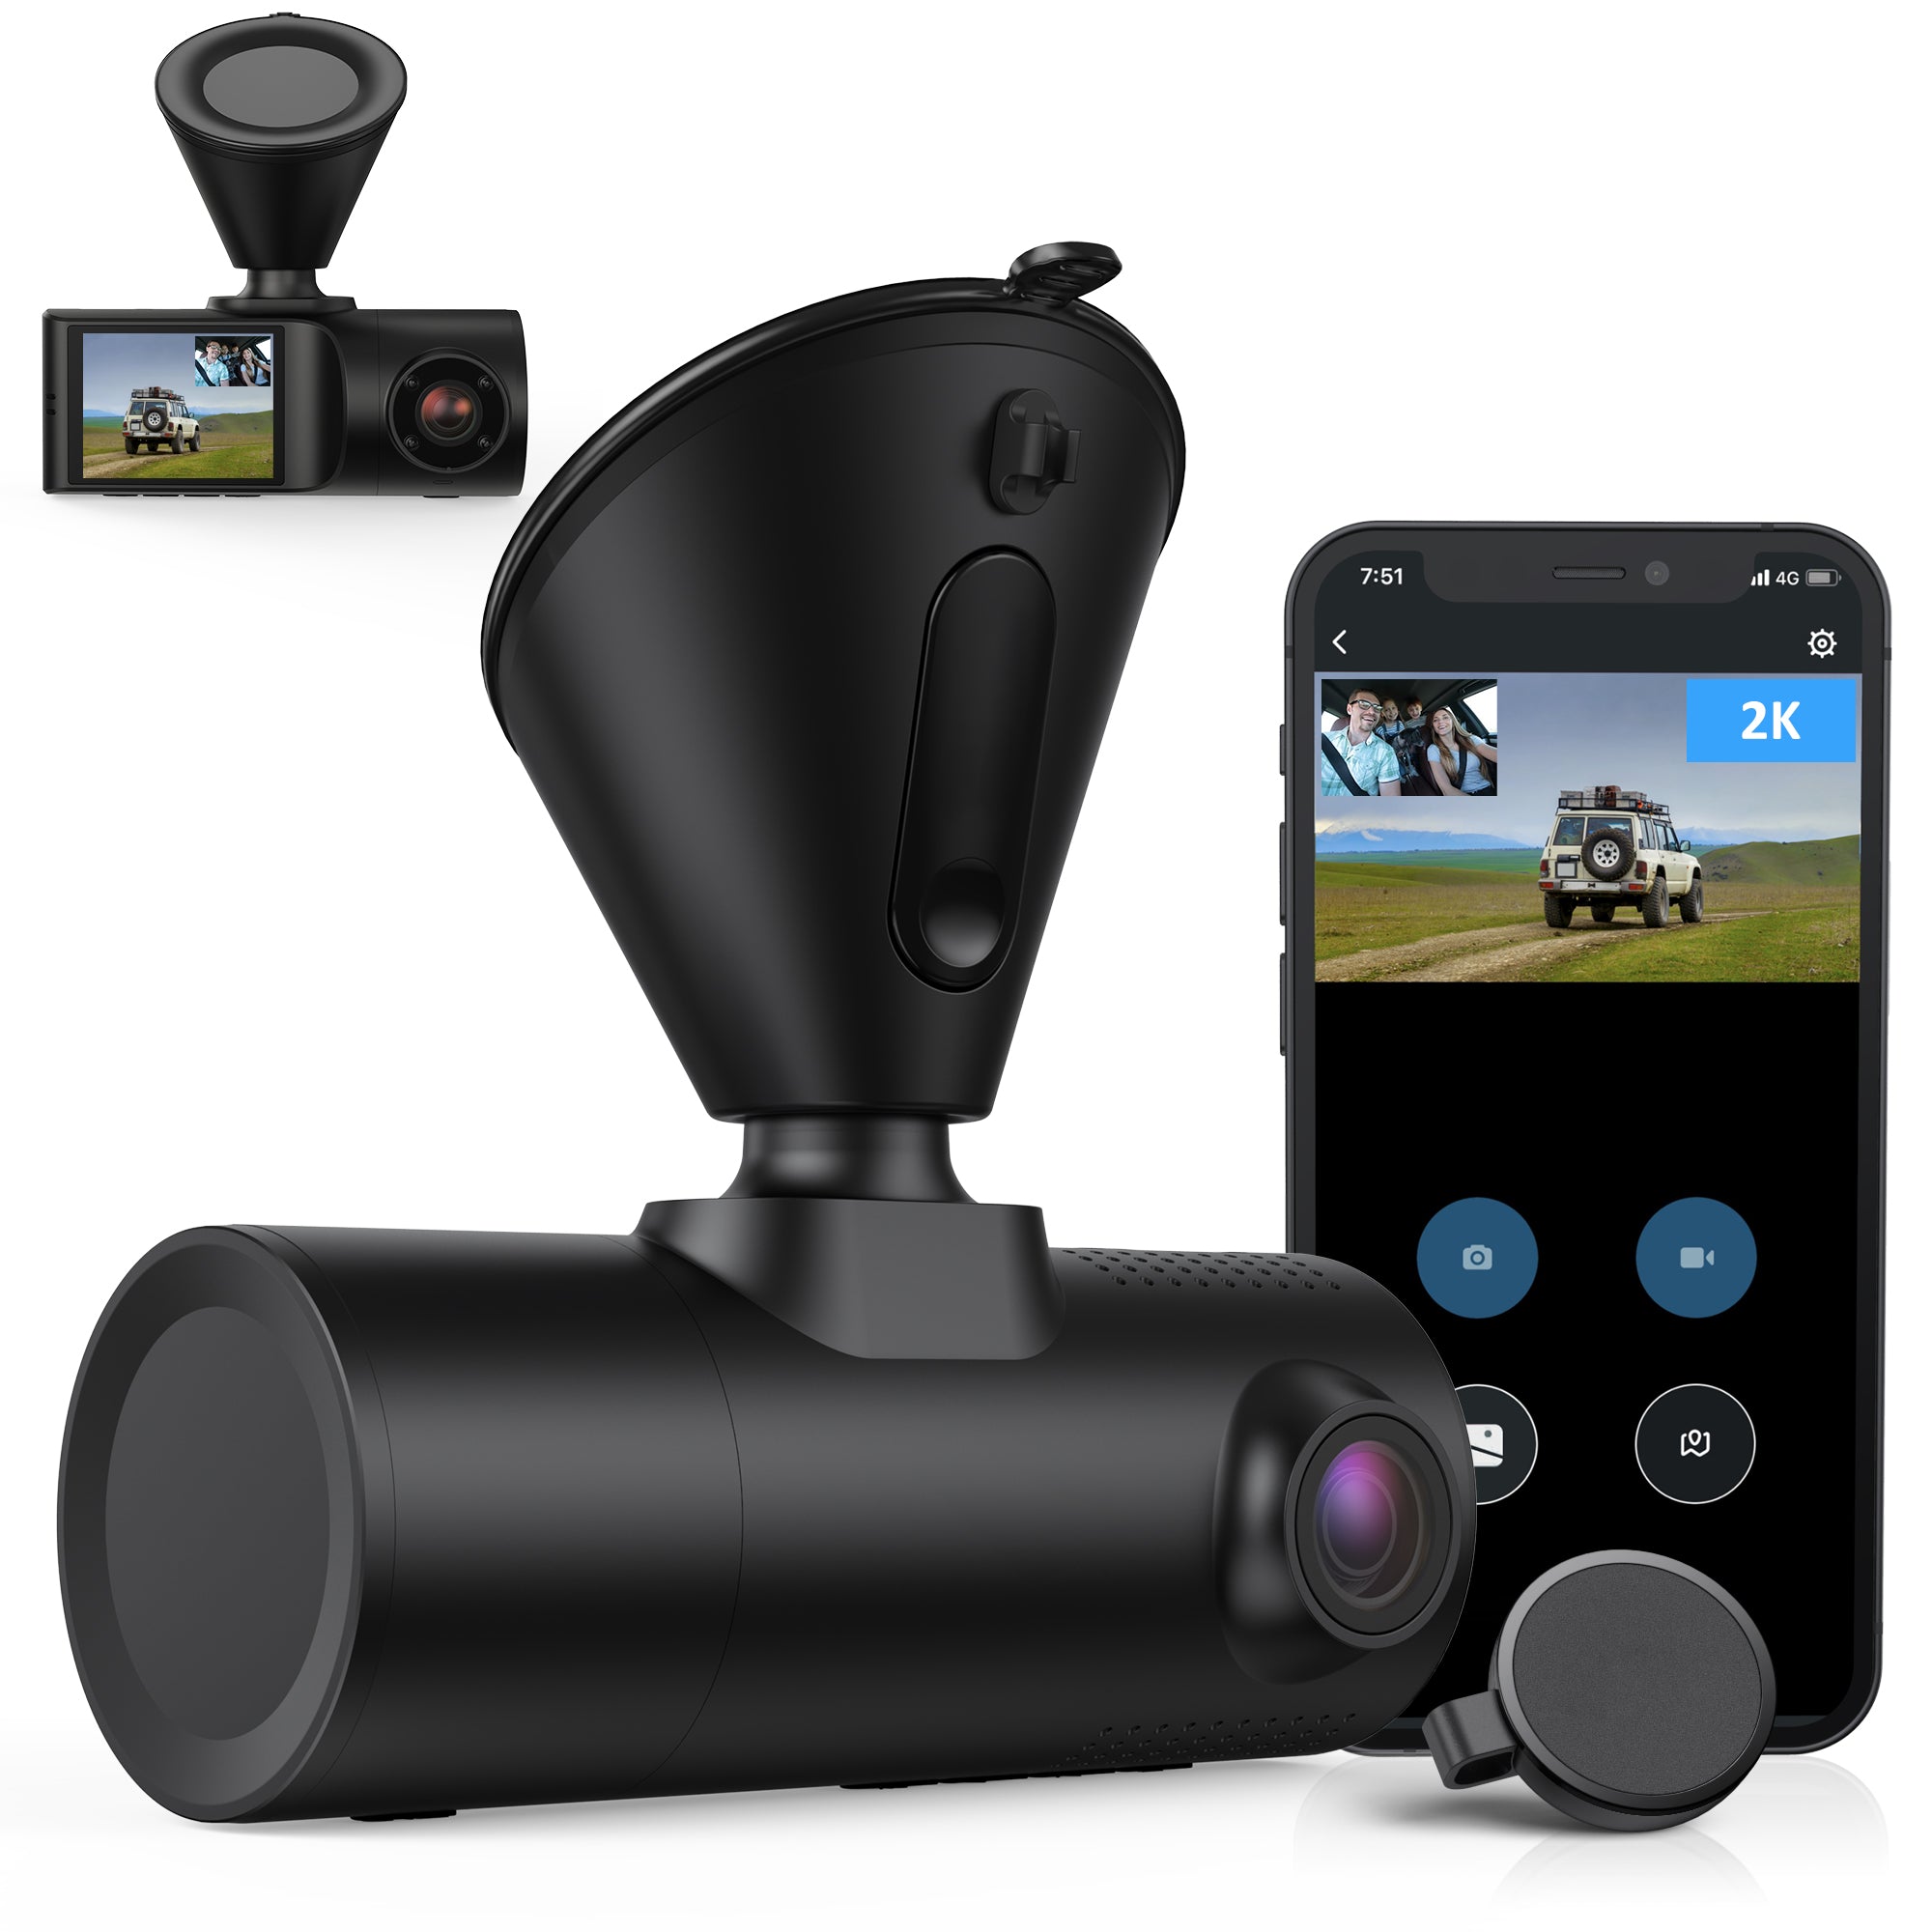 Answering Common Dash Cam Questions - VAVA Blog